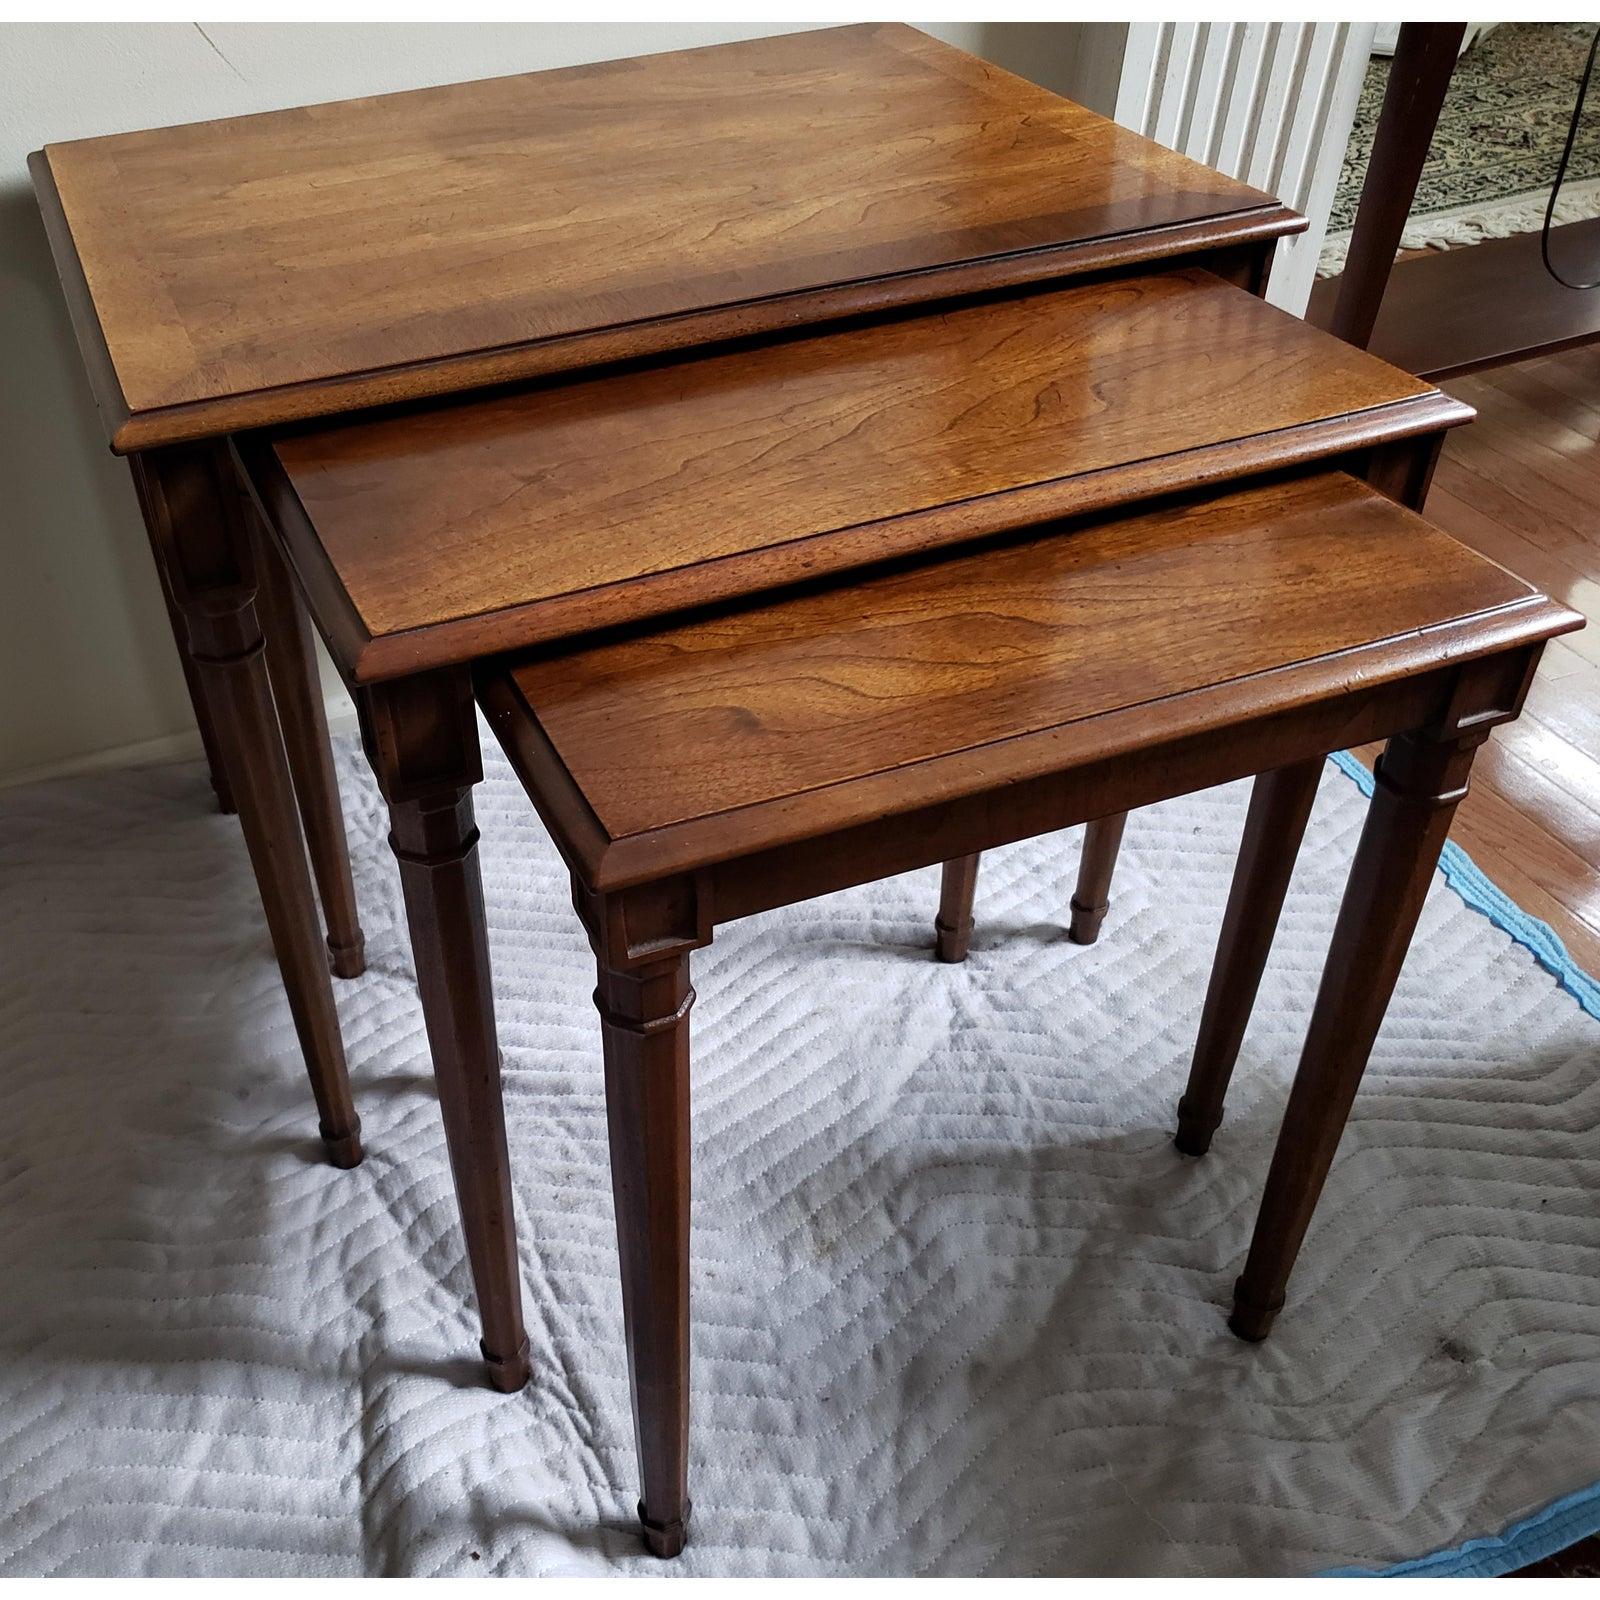 Solid dark Walnut Nesting Tables by Henredon. Manufactured in 1976. Hand Rubbed finish. Excellent condition with minimal wear. Measurements:
Large Table 27.25W x 20.25